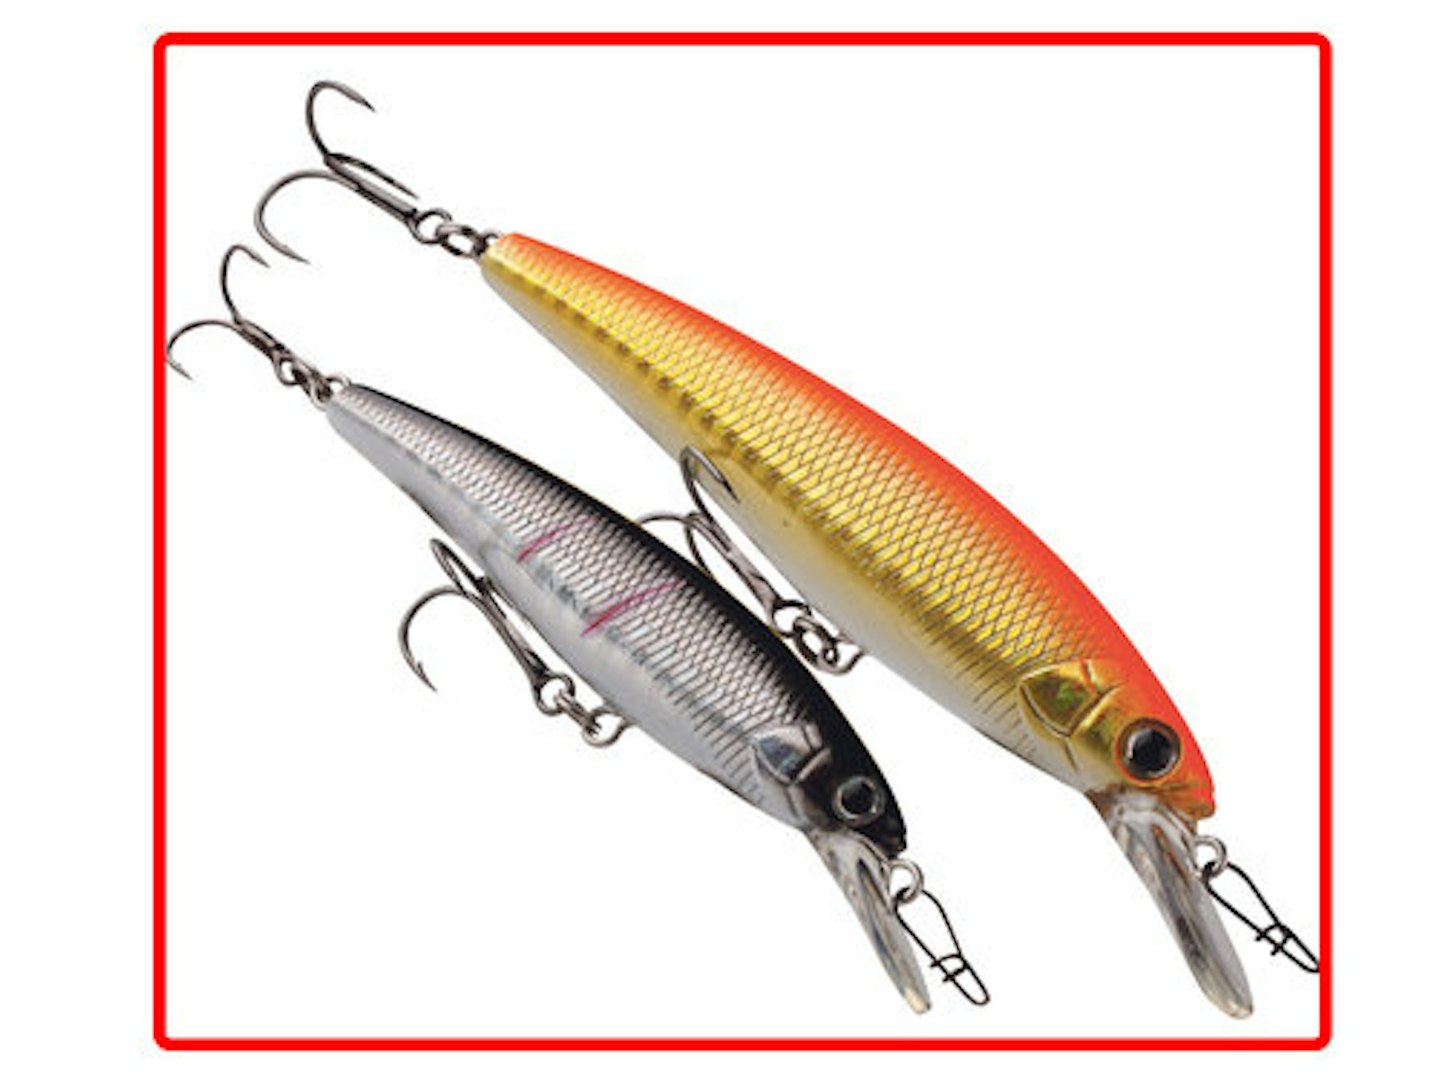 BEST BAITS TO USE TO CATCH BIG PERCH